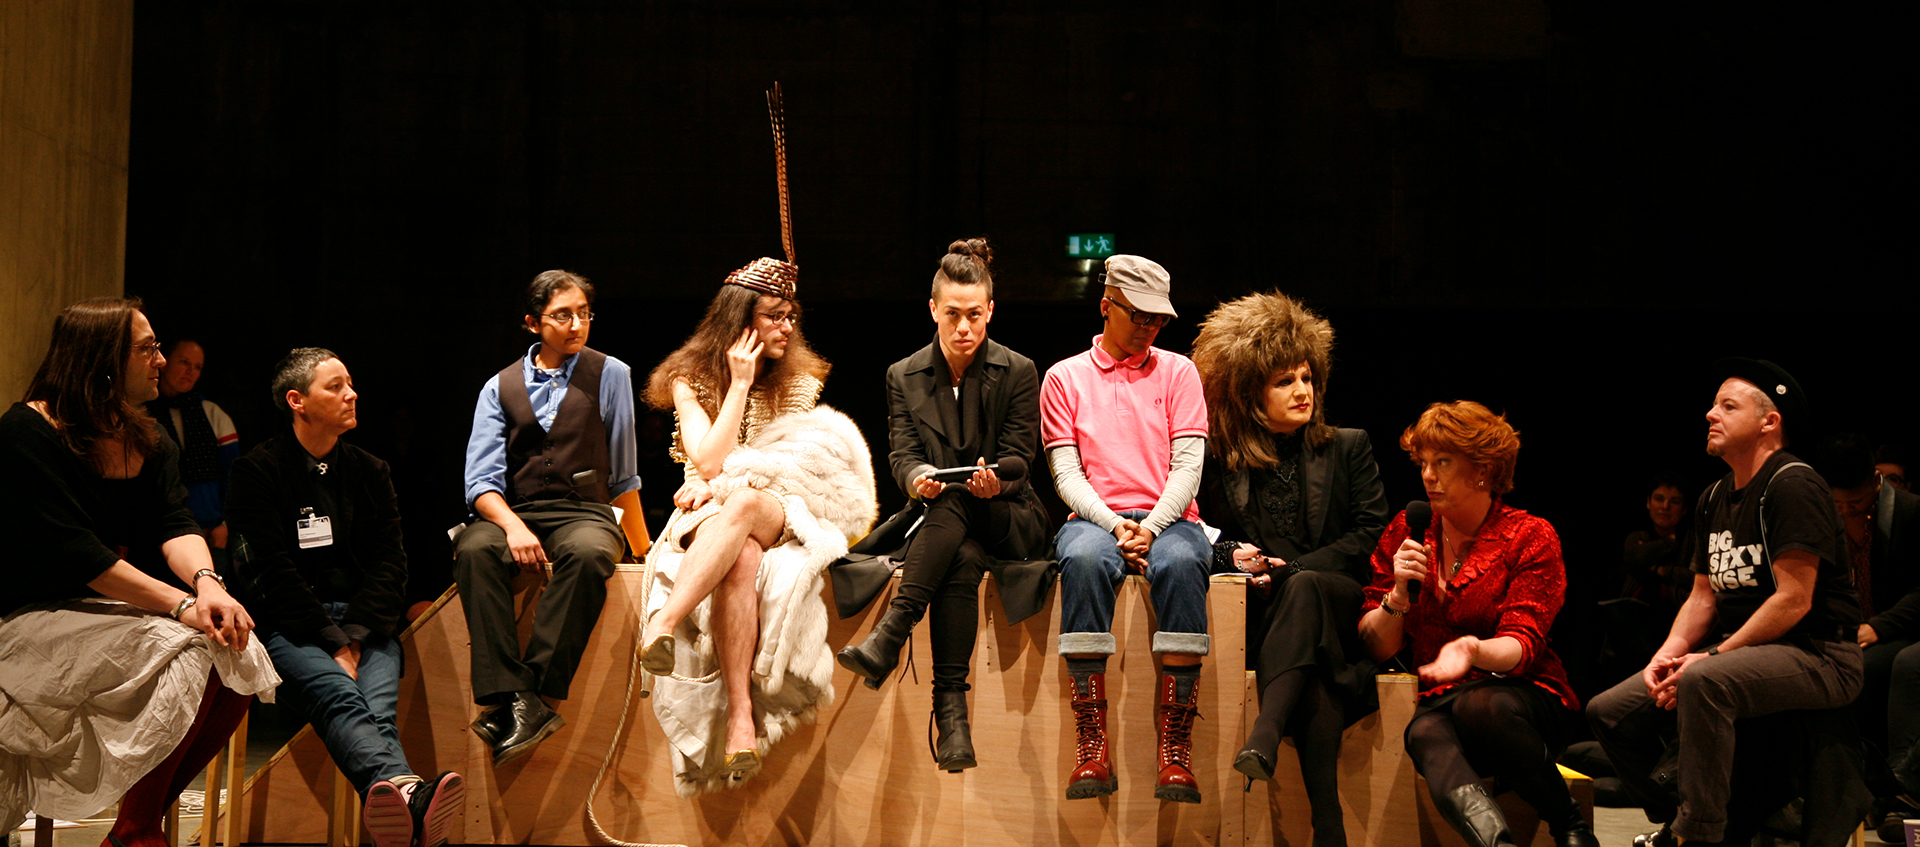 Nine people seated on a geometric wood platform. The second person from the right holds a microphone. 